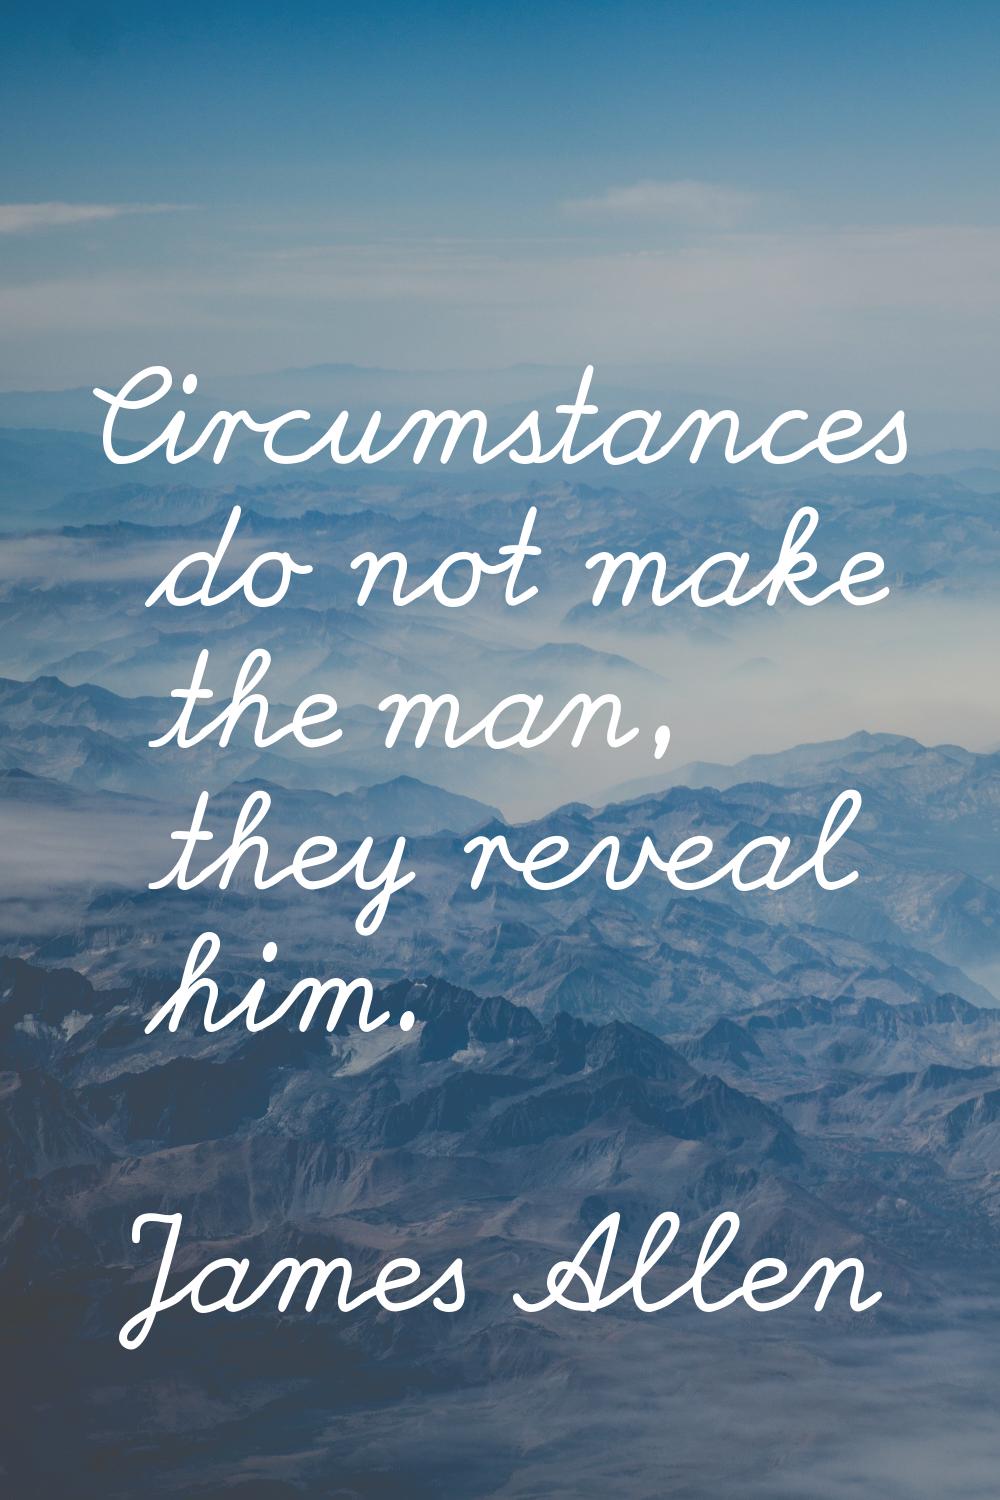 Circumstances do not make the man, they reveal him.